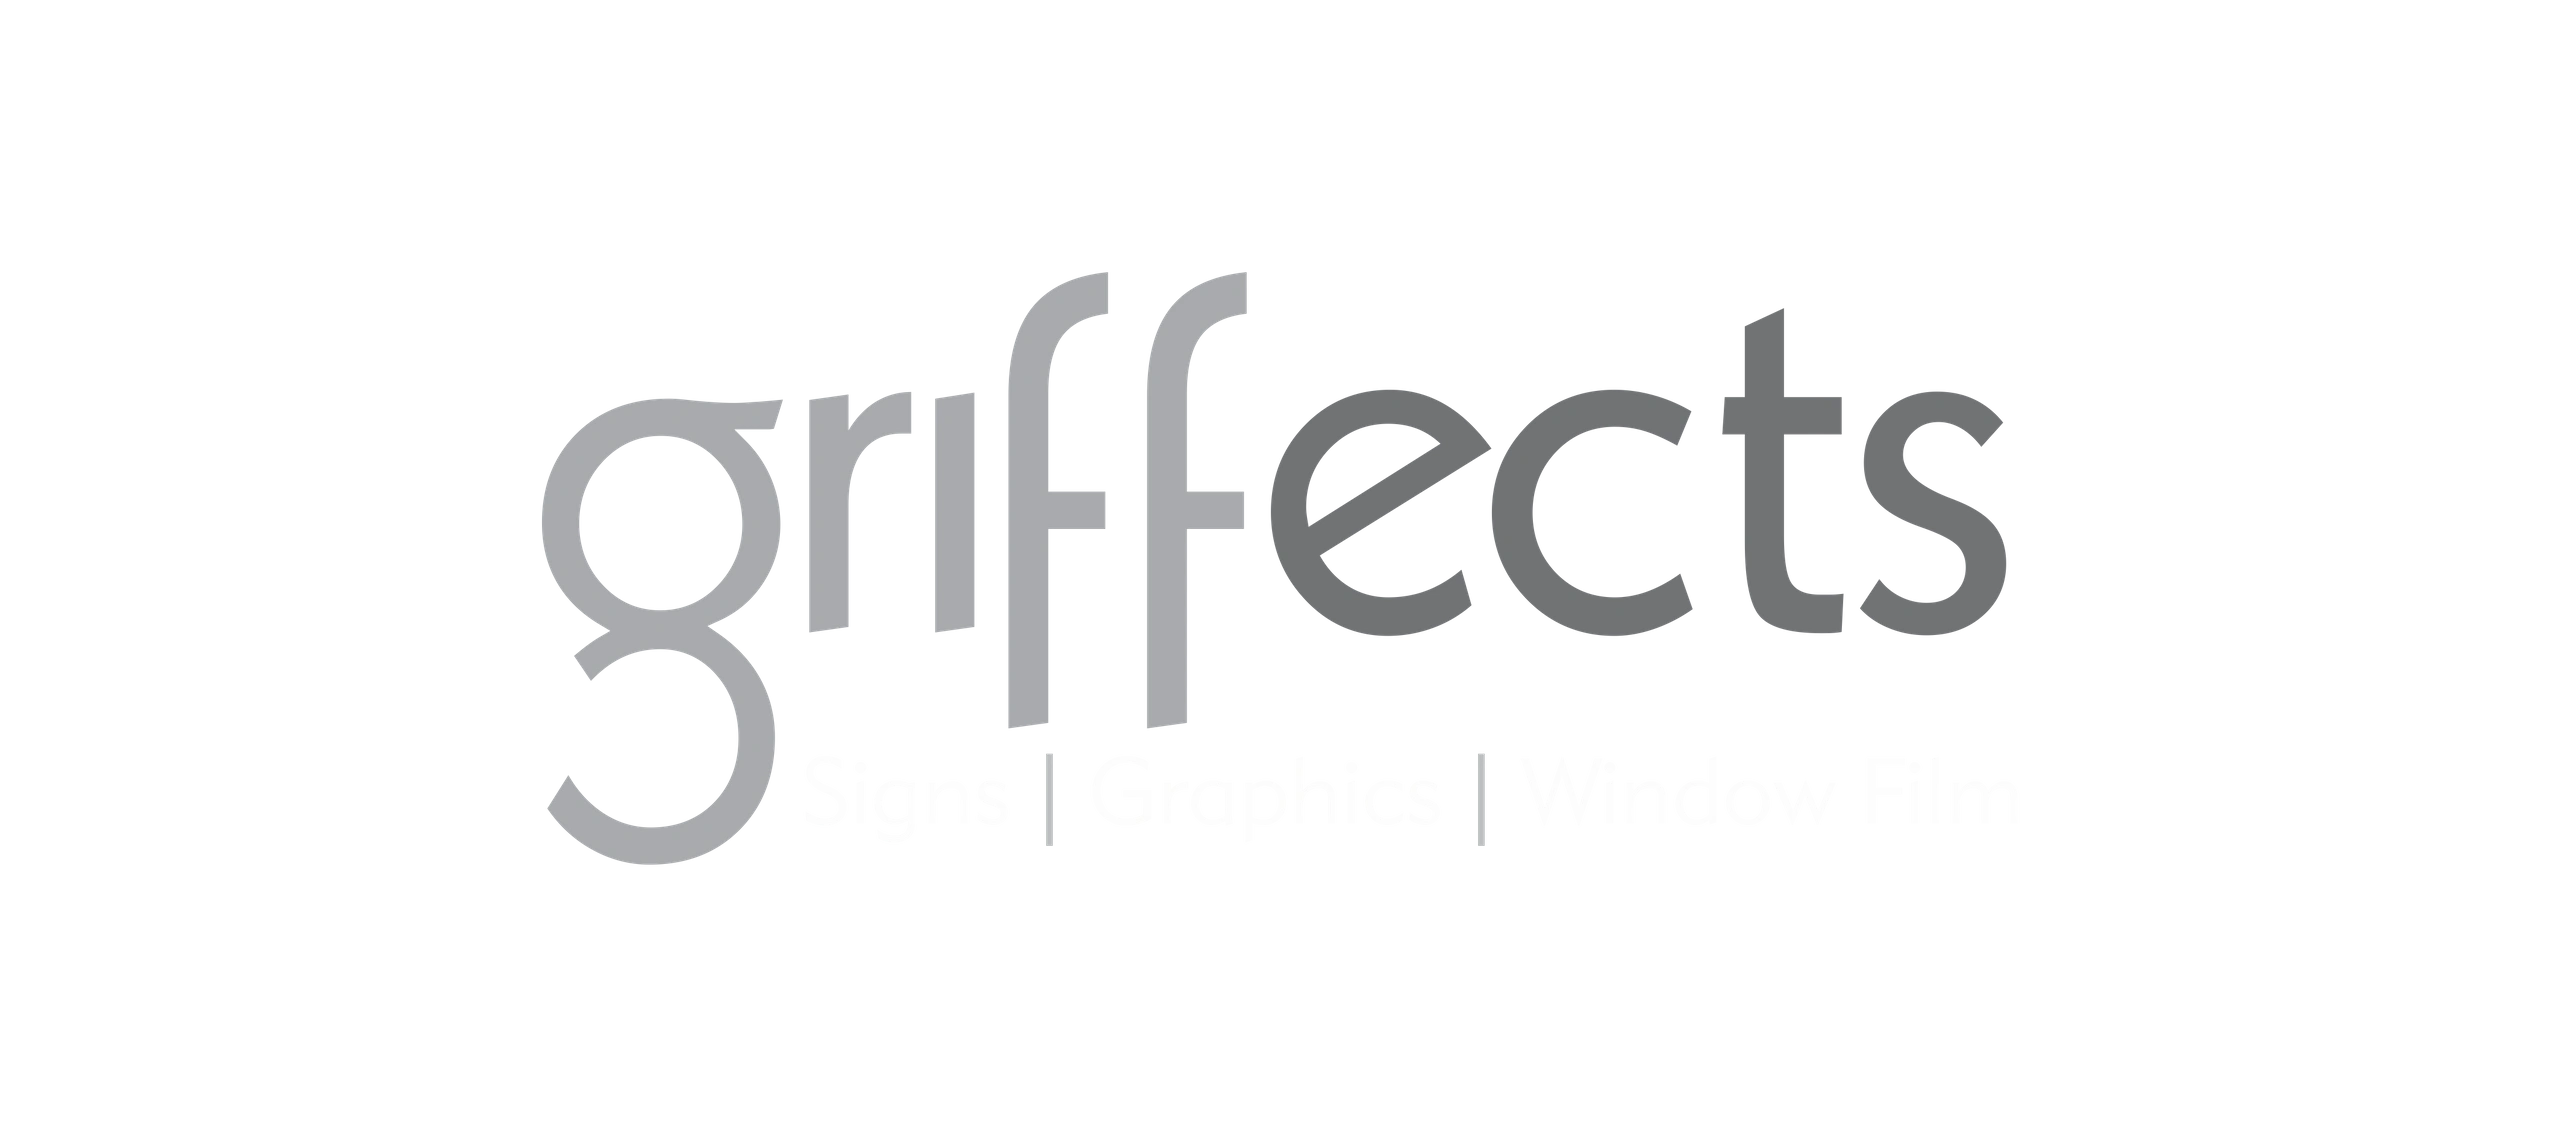 Griffects Main Logo 